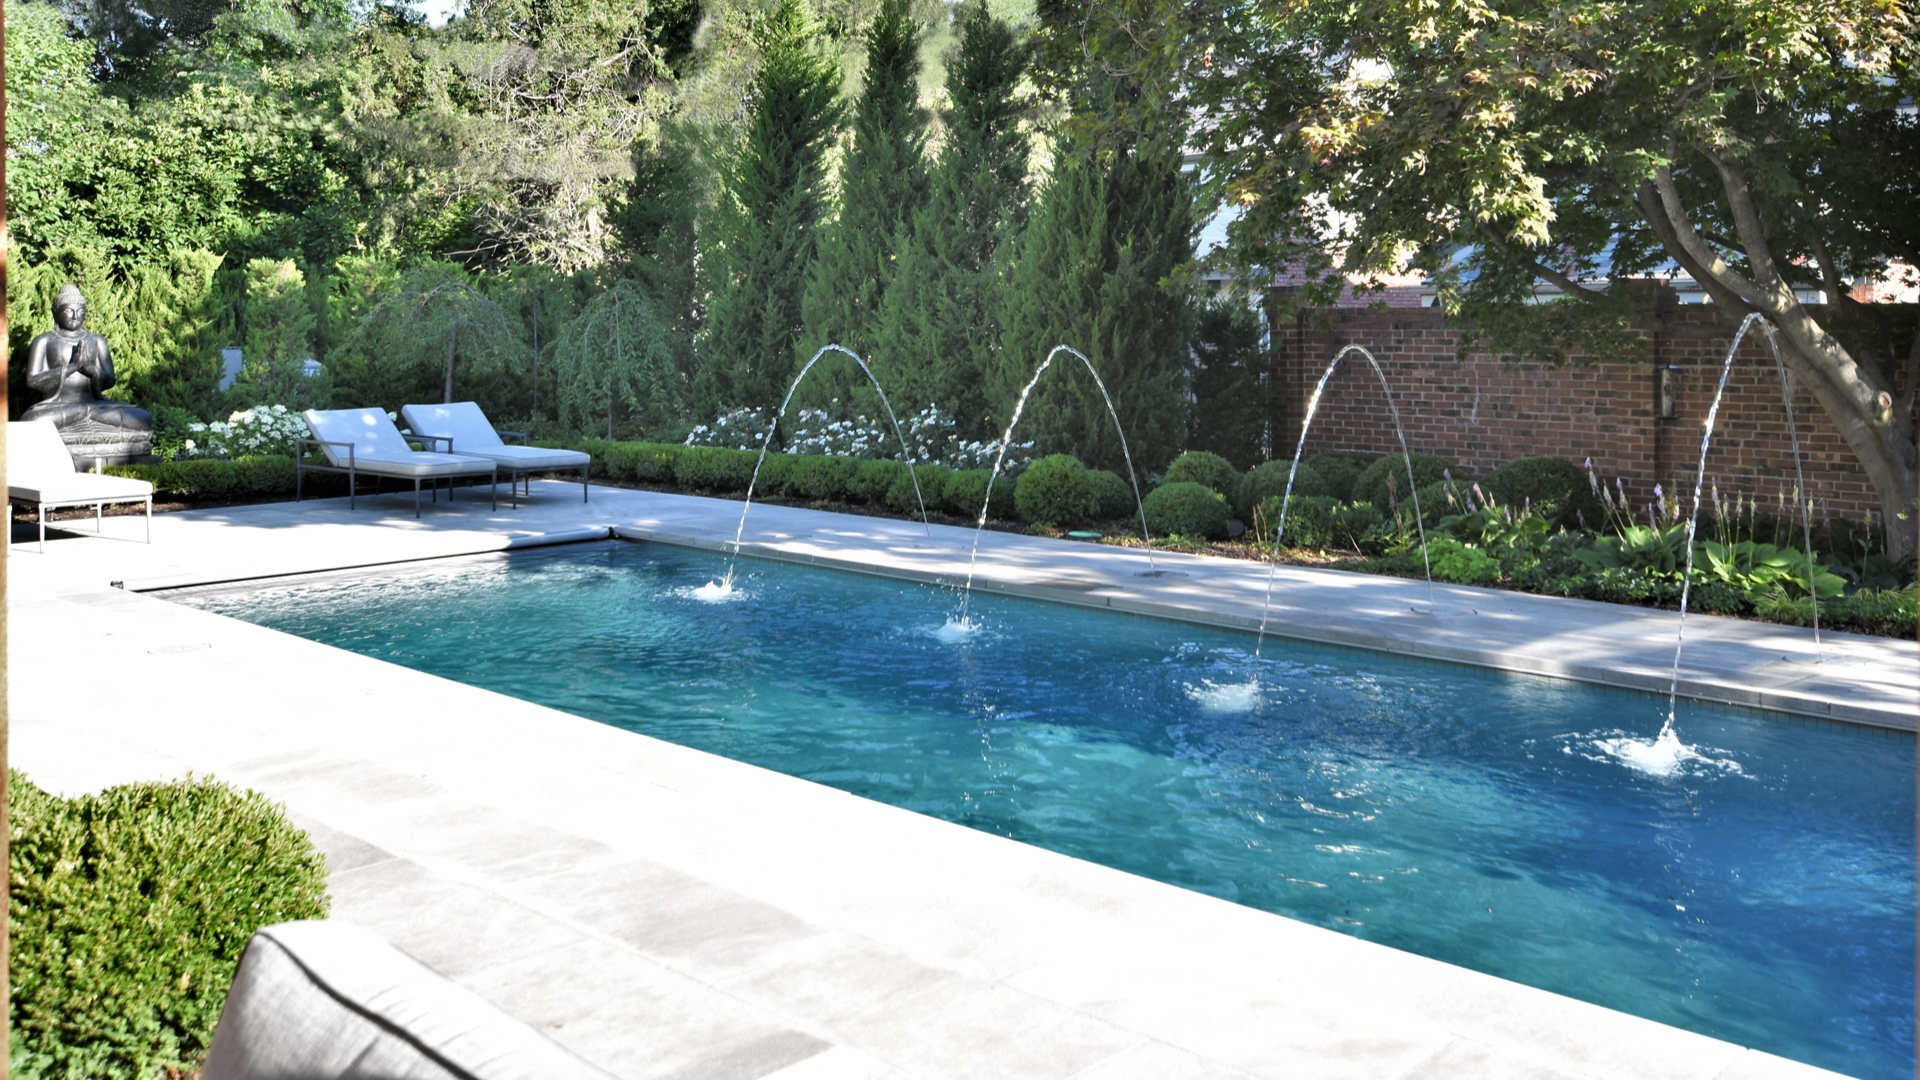 Stunning swimming pool with fountains and landscaping all around it in Overland Park, KS.